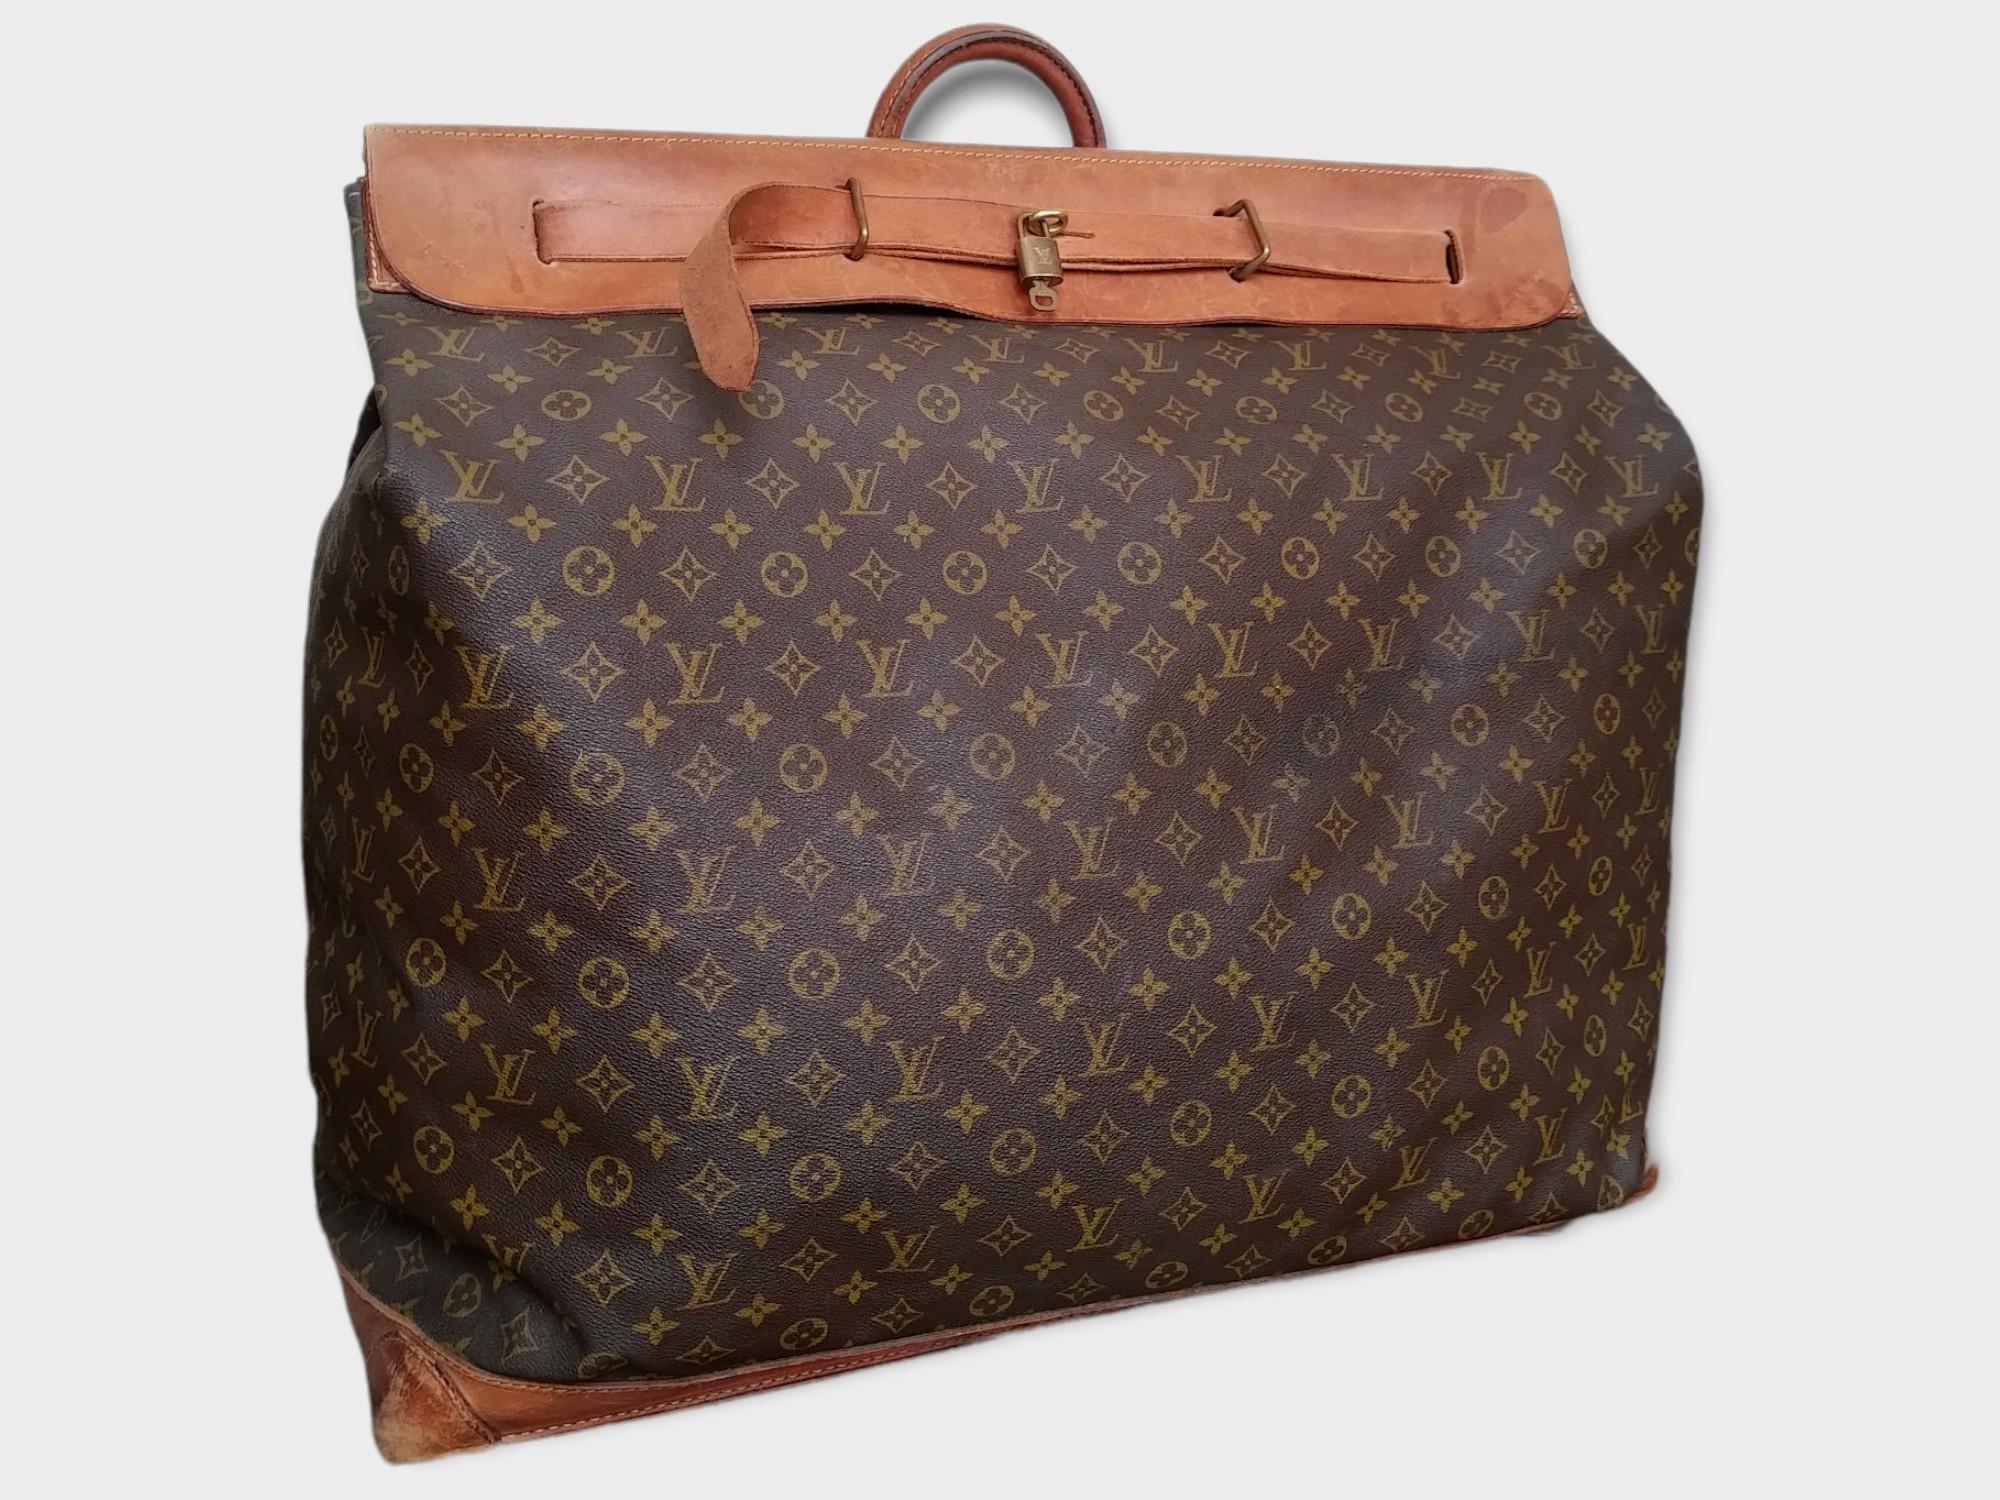 Louis Vuitton Extra Large Monogram Steamer Travel bag
- 100% authentic Louis Vuitton
- Monogram canvas with natural cowhide leather trim
- Rolled top vachetta handle
- Textile canvas lining inside
- Tightening strap under a flap
- Padlock with key